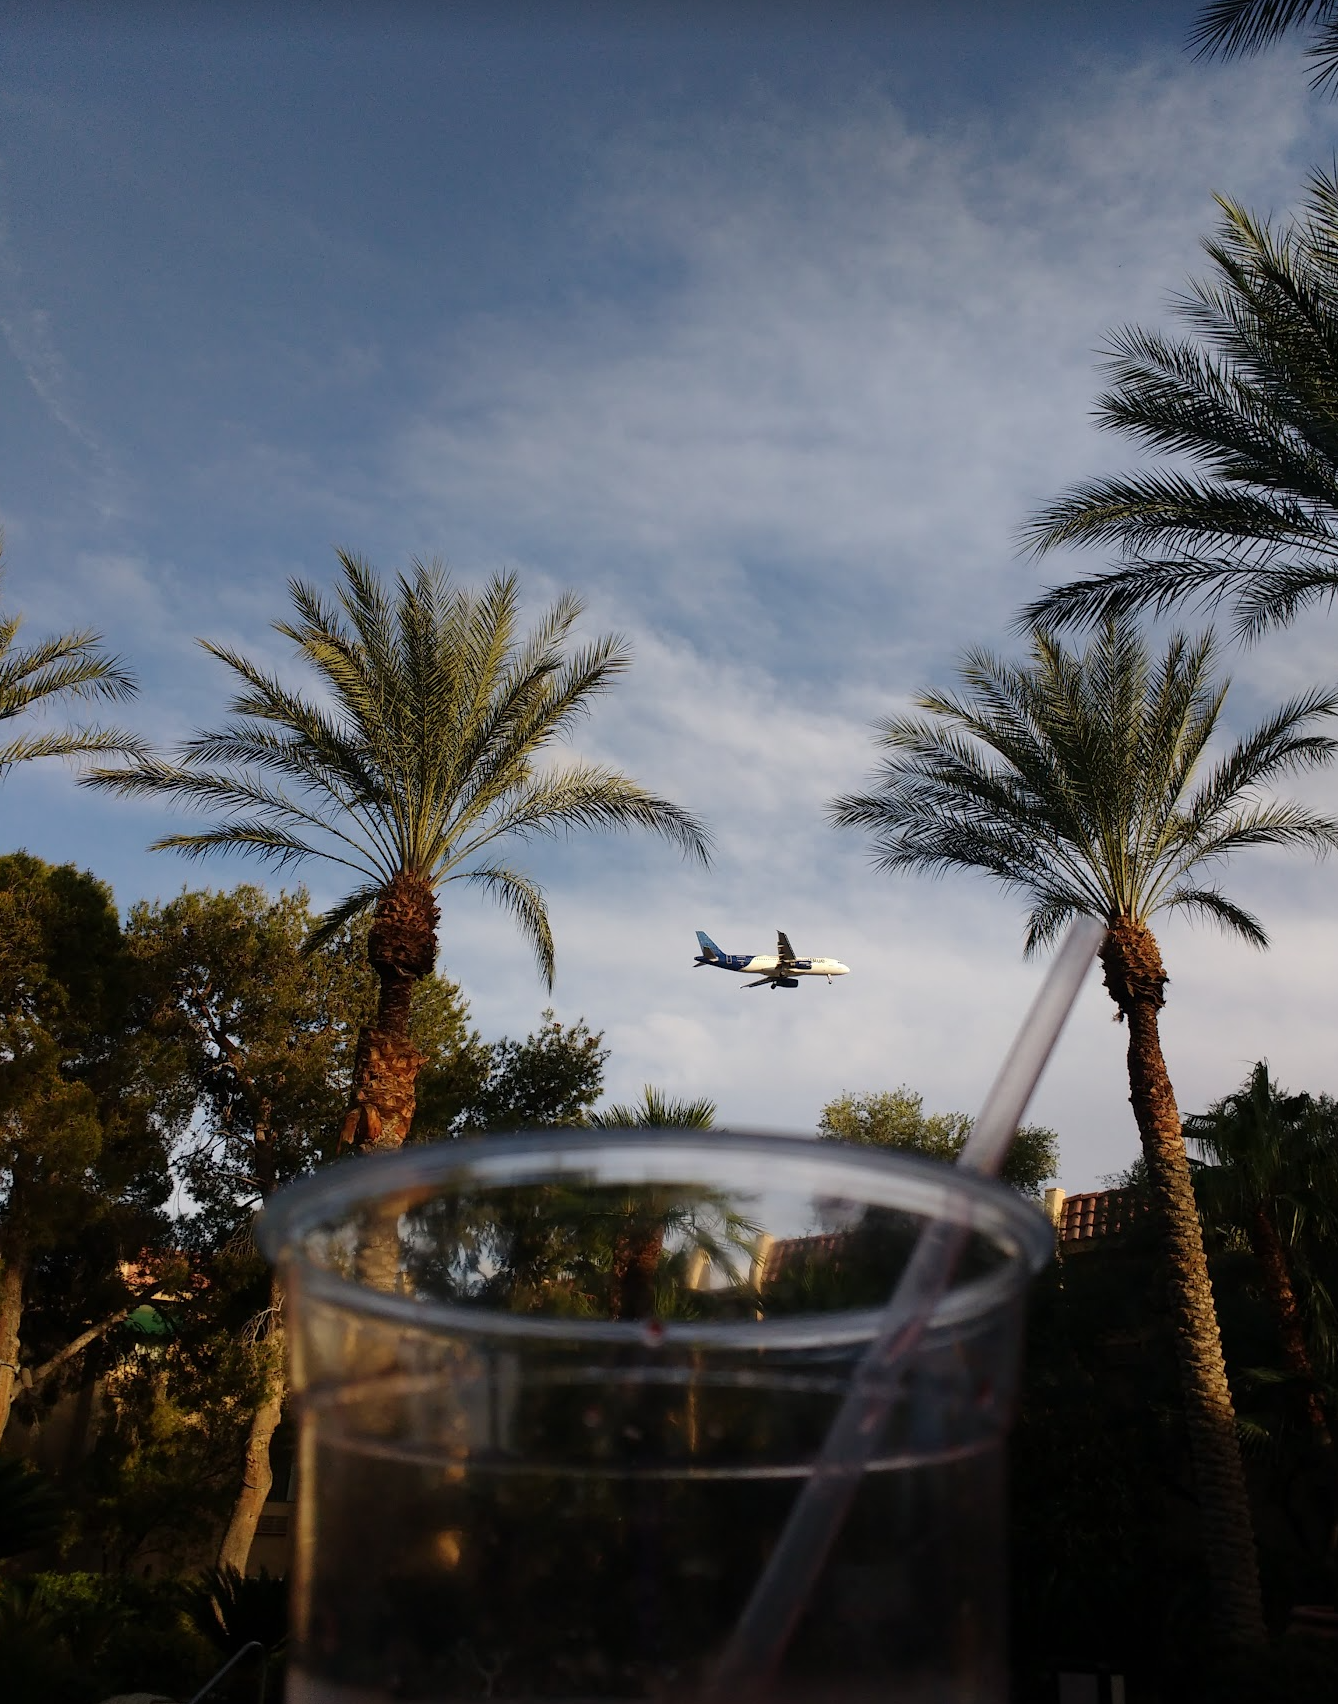 snapshot of an airplane flying over palm trees, with a cocktail in the foreground